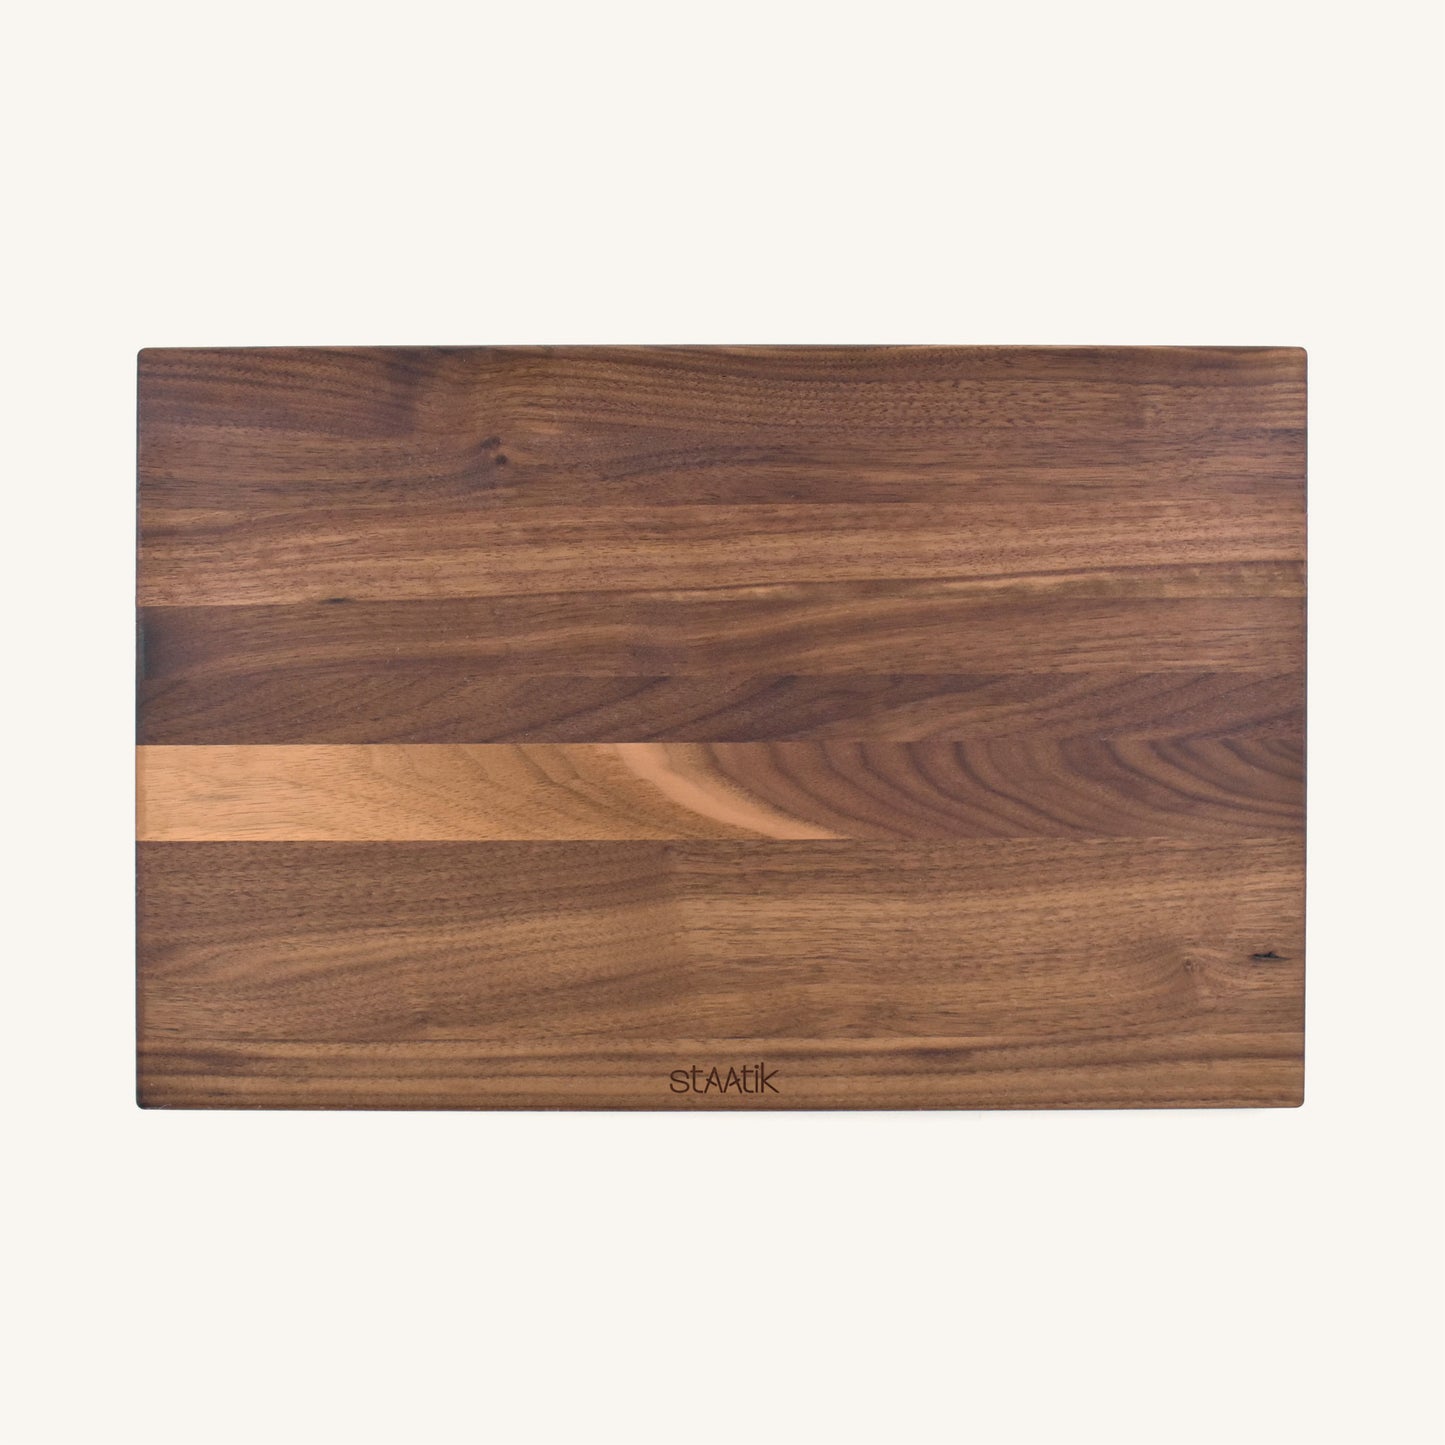 Regular Cutting Board with Rounded Corners and Edges